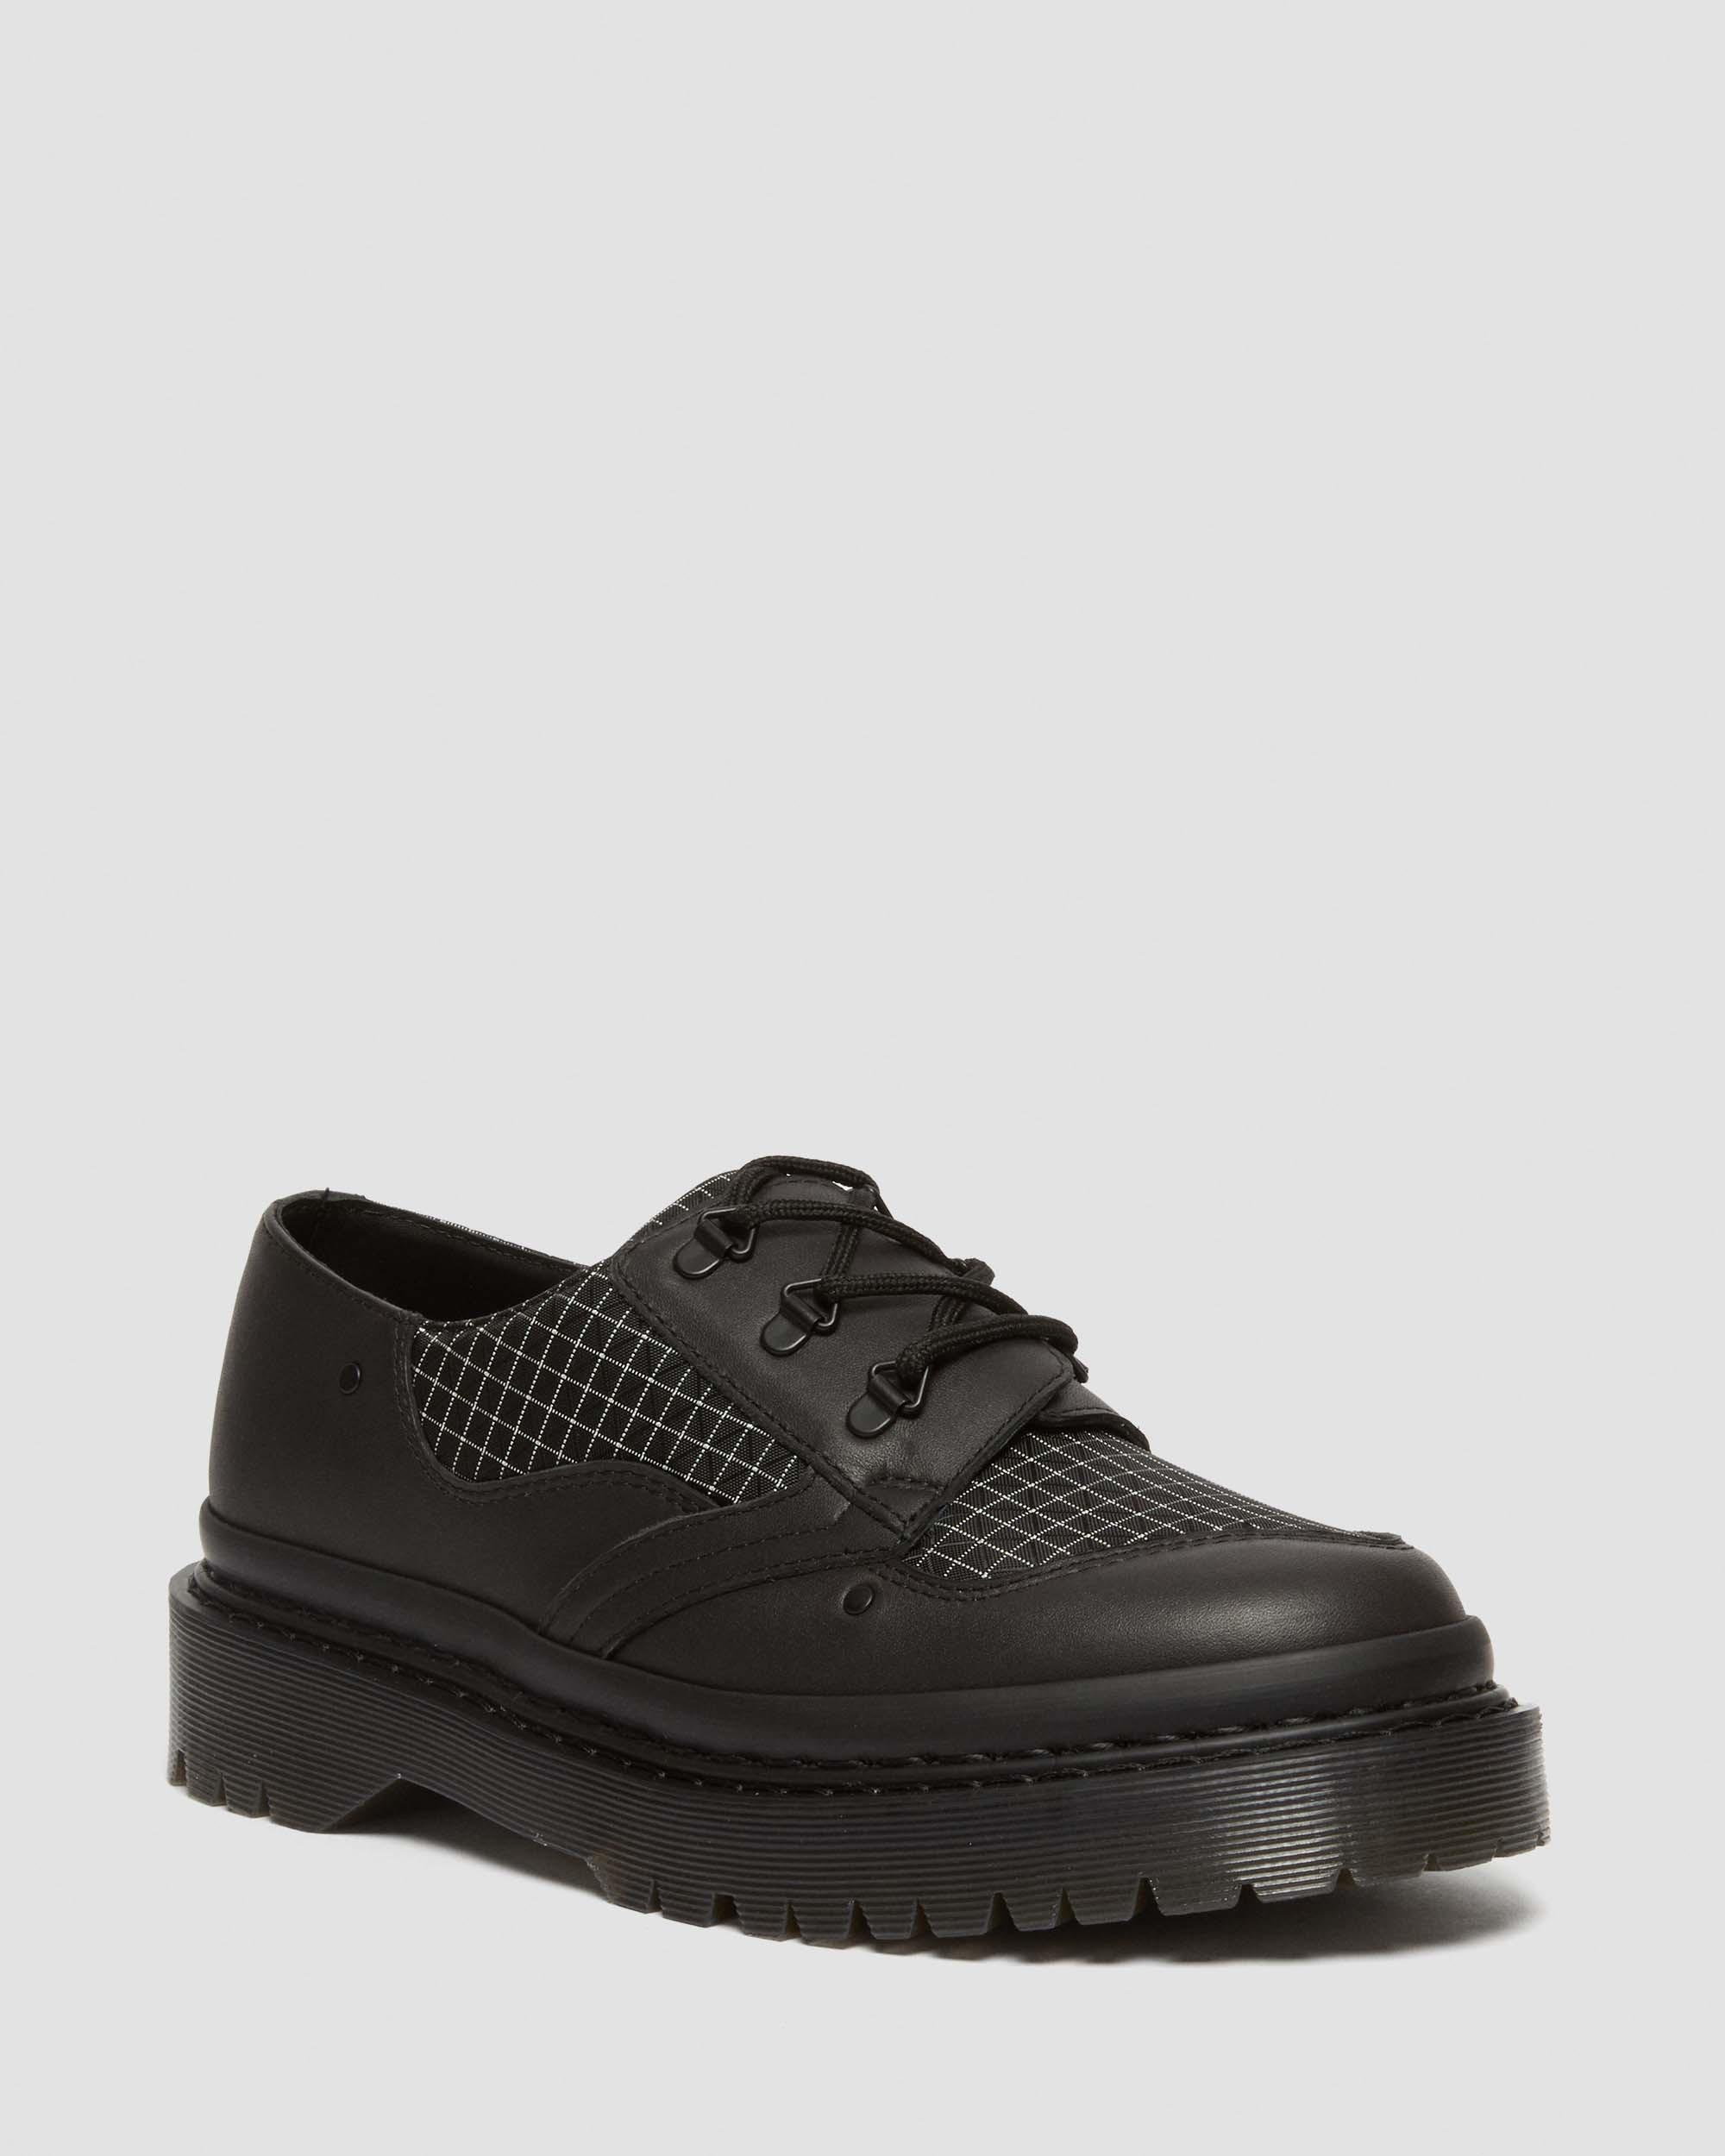 1461 Bex Ripstop Grid Oxford Shoes